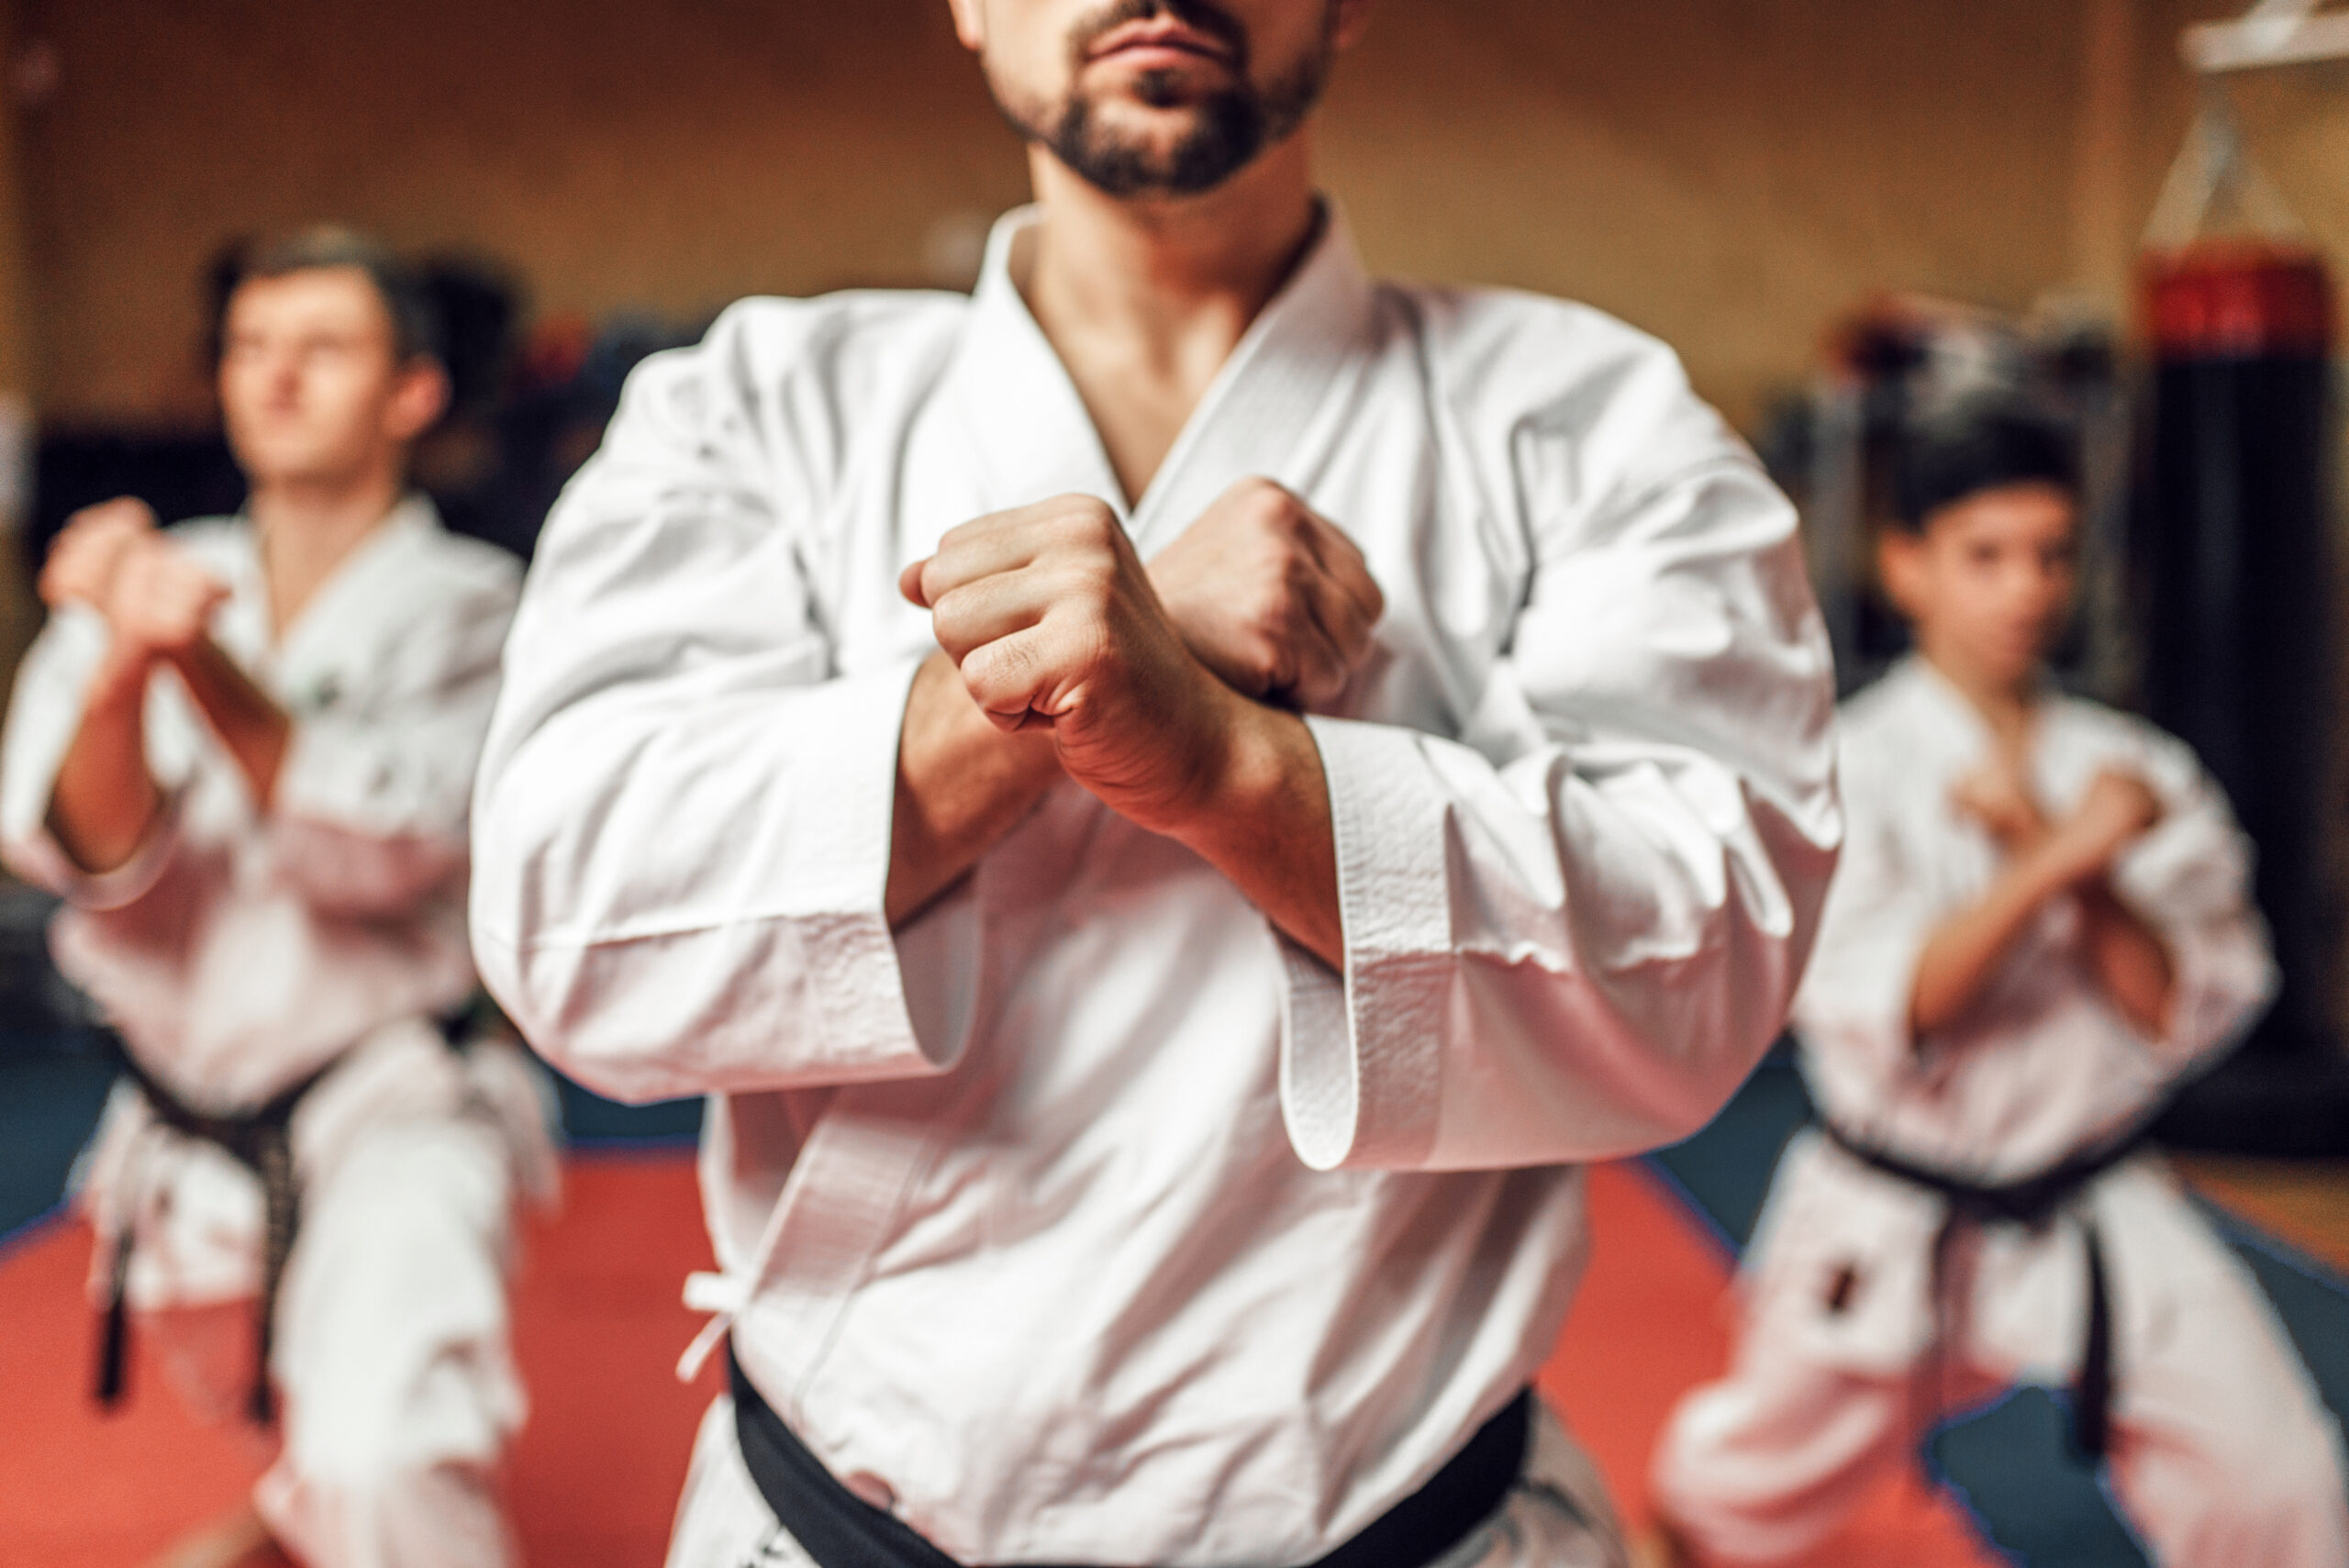 72% Increase in Leads For South Florida Martial Arts Dojo